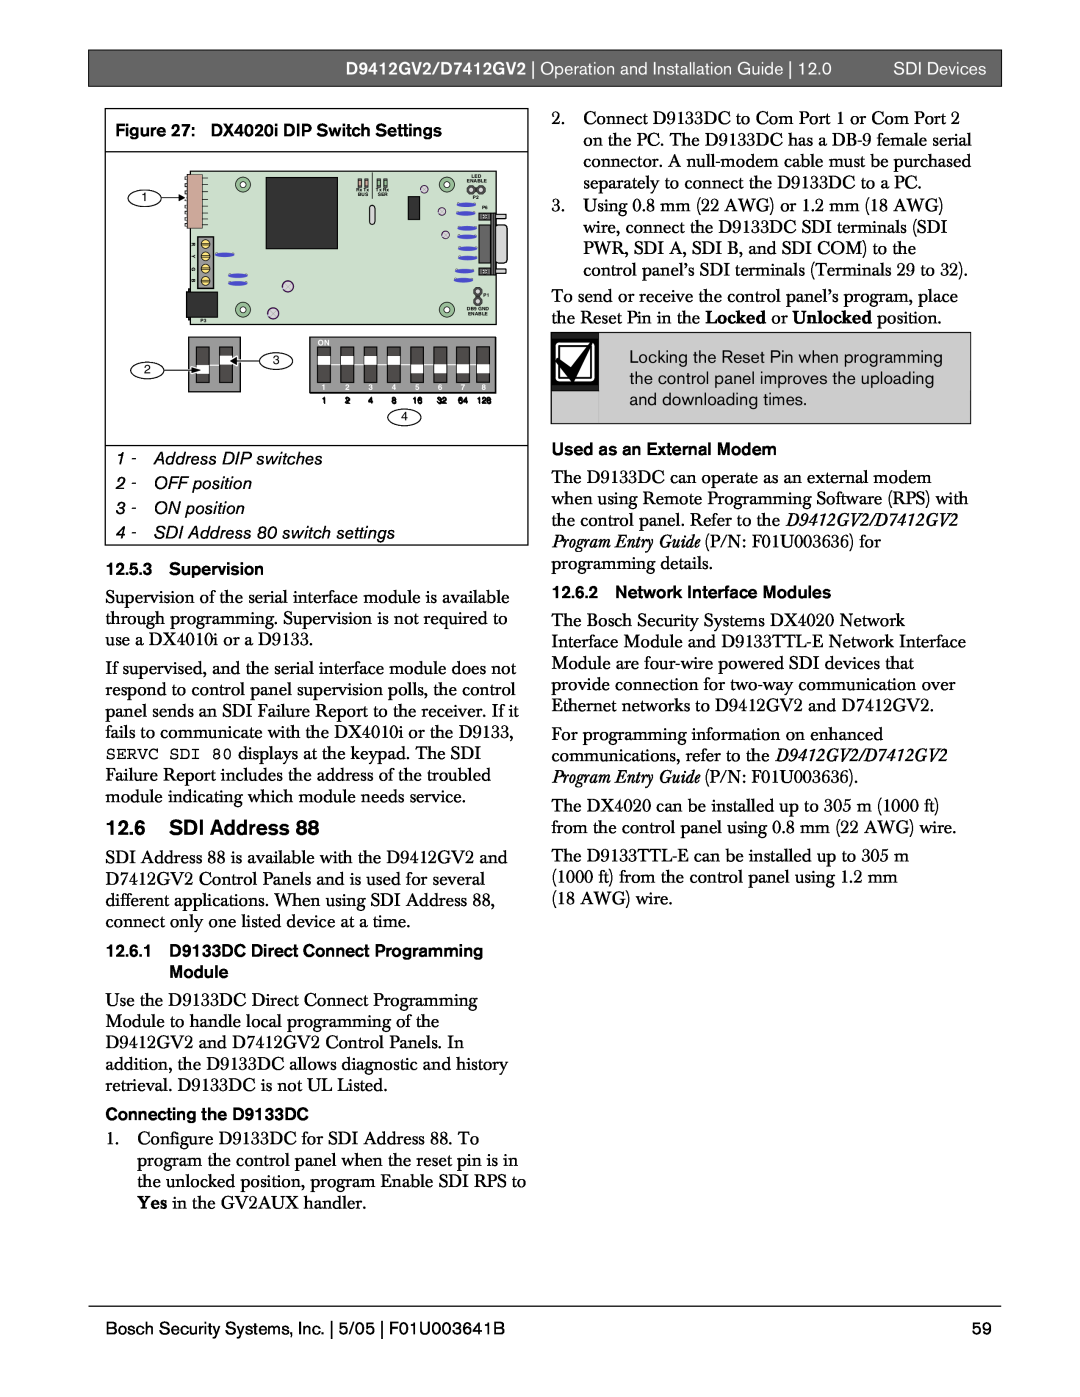 Bosch Appliances D9412GV2 12.6SDI Address, DX4020i DIP Switch Settings, Supervision, Connecting the D9133DC, SDI Devices 